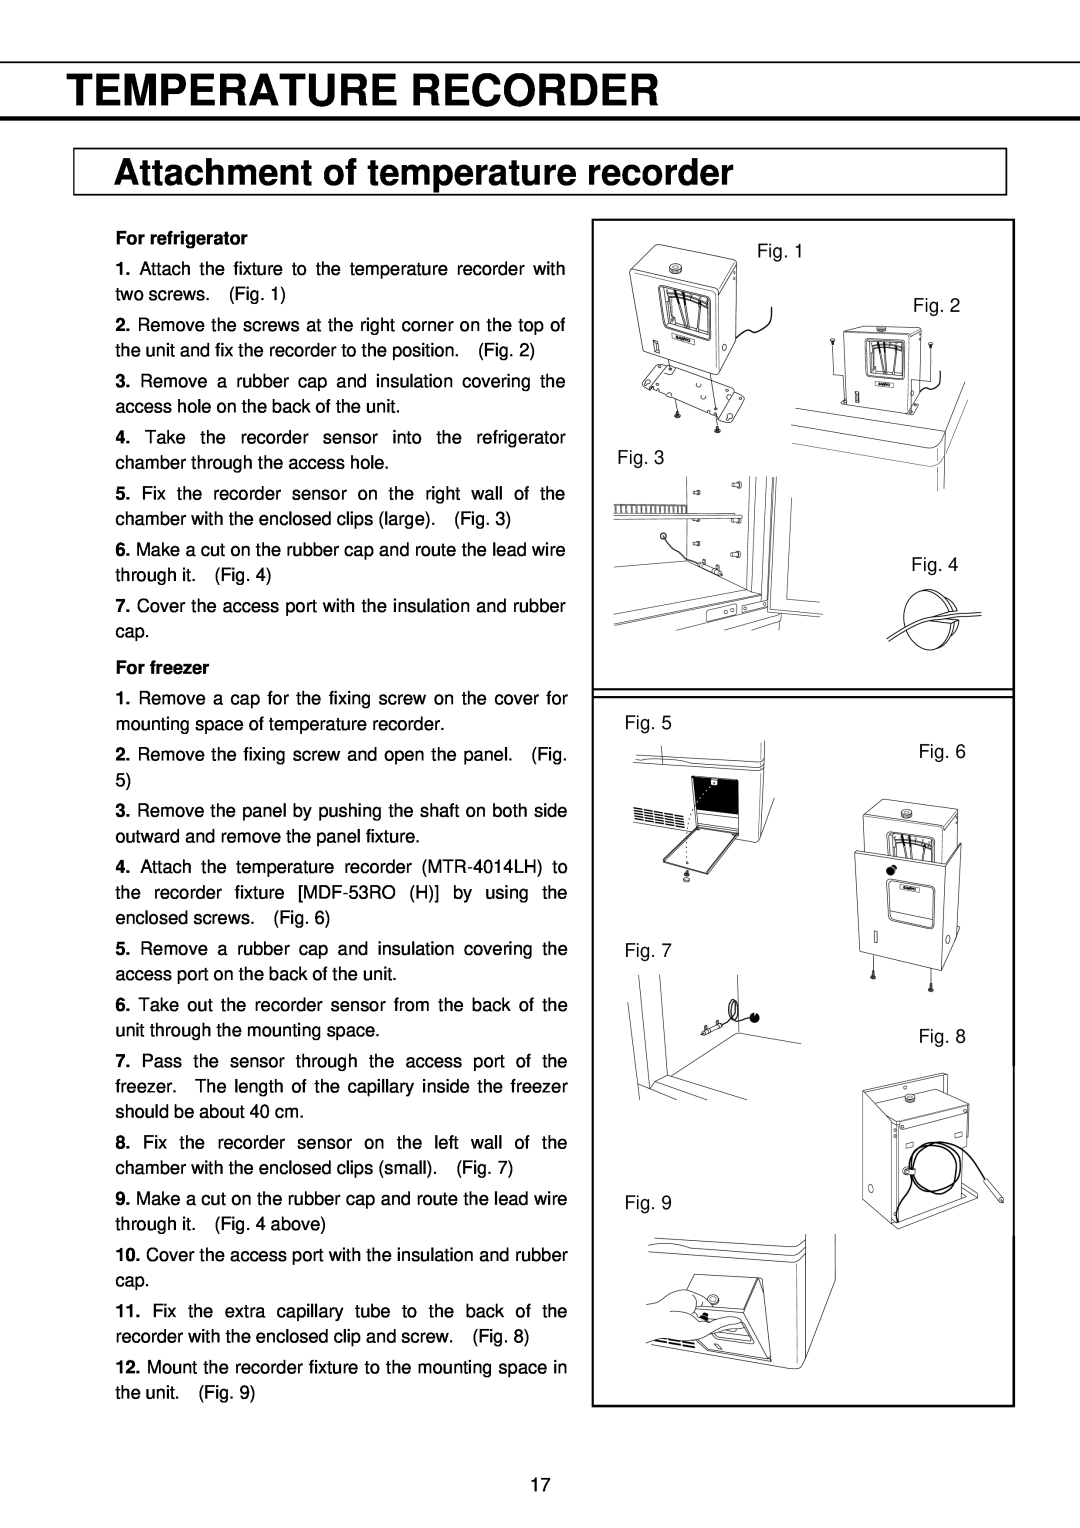 Sanyo MPR-411FR instruction manual Attachment of temperature recorder, Temperature Recorder 